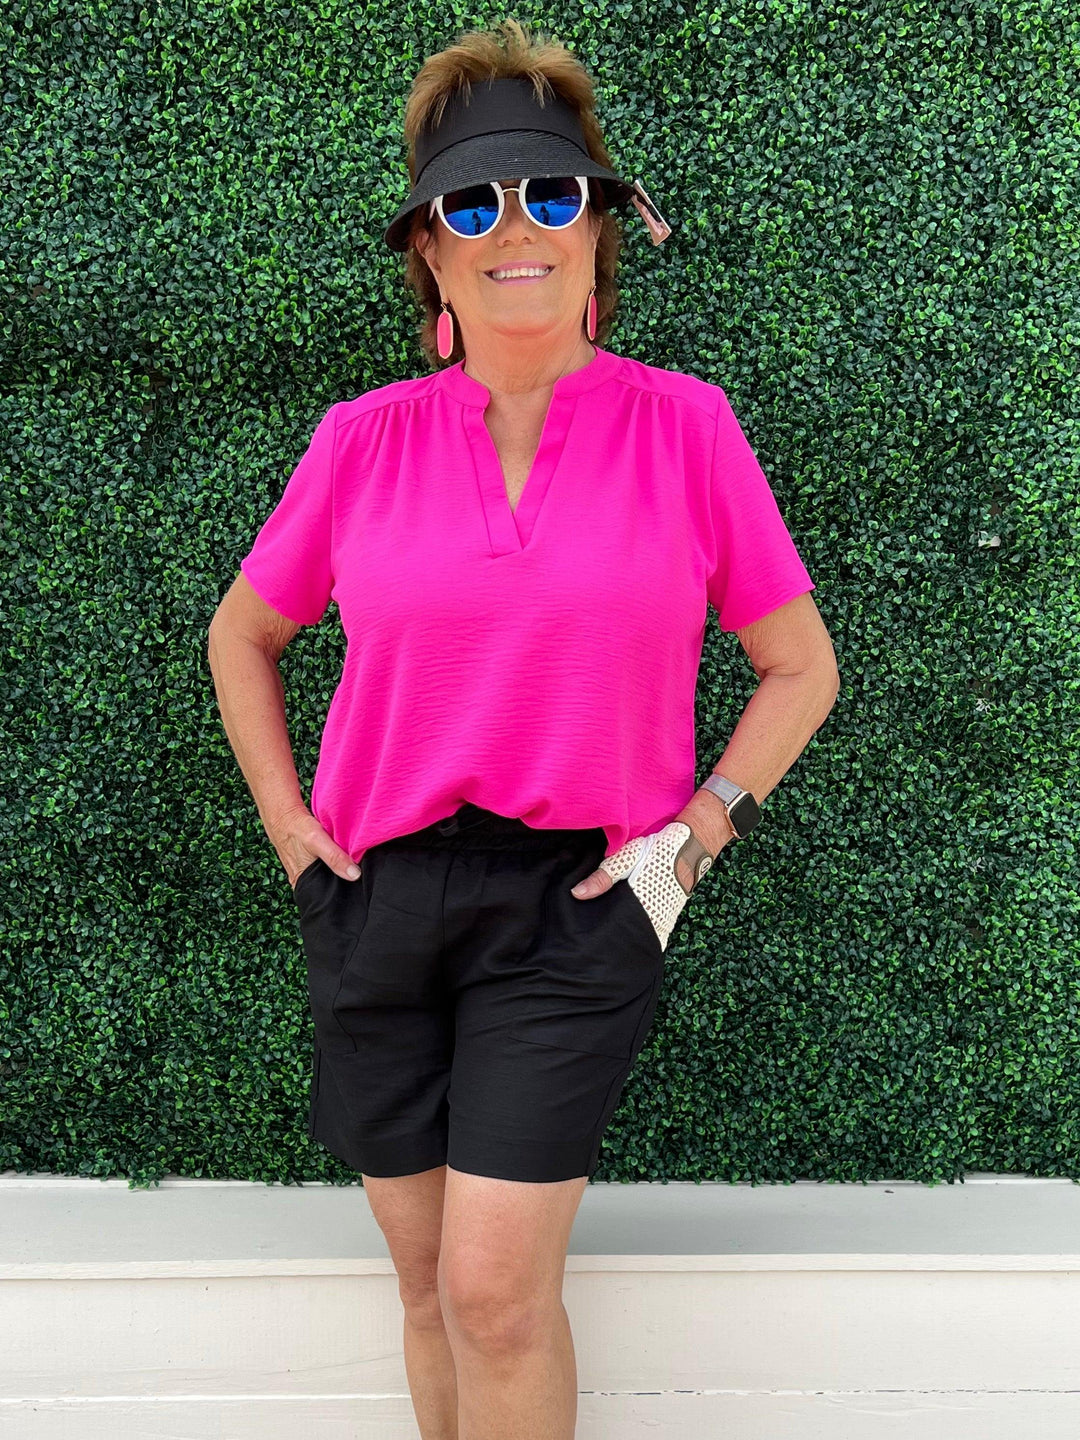 Boutique owner rocks these mid length shorts with her golf outfit